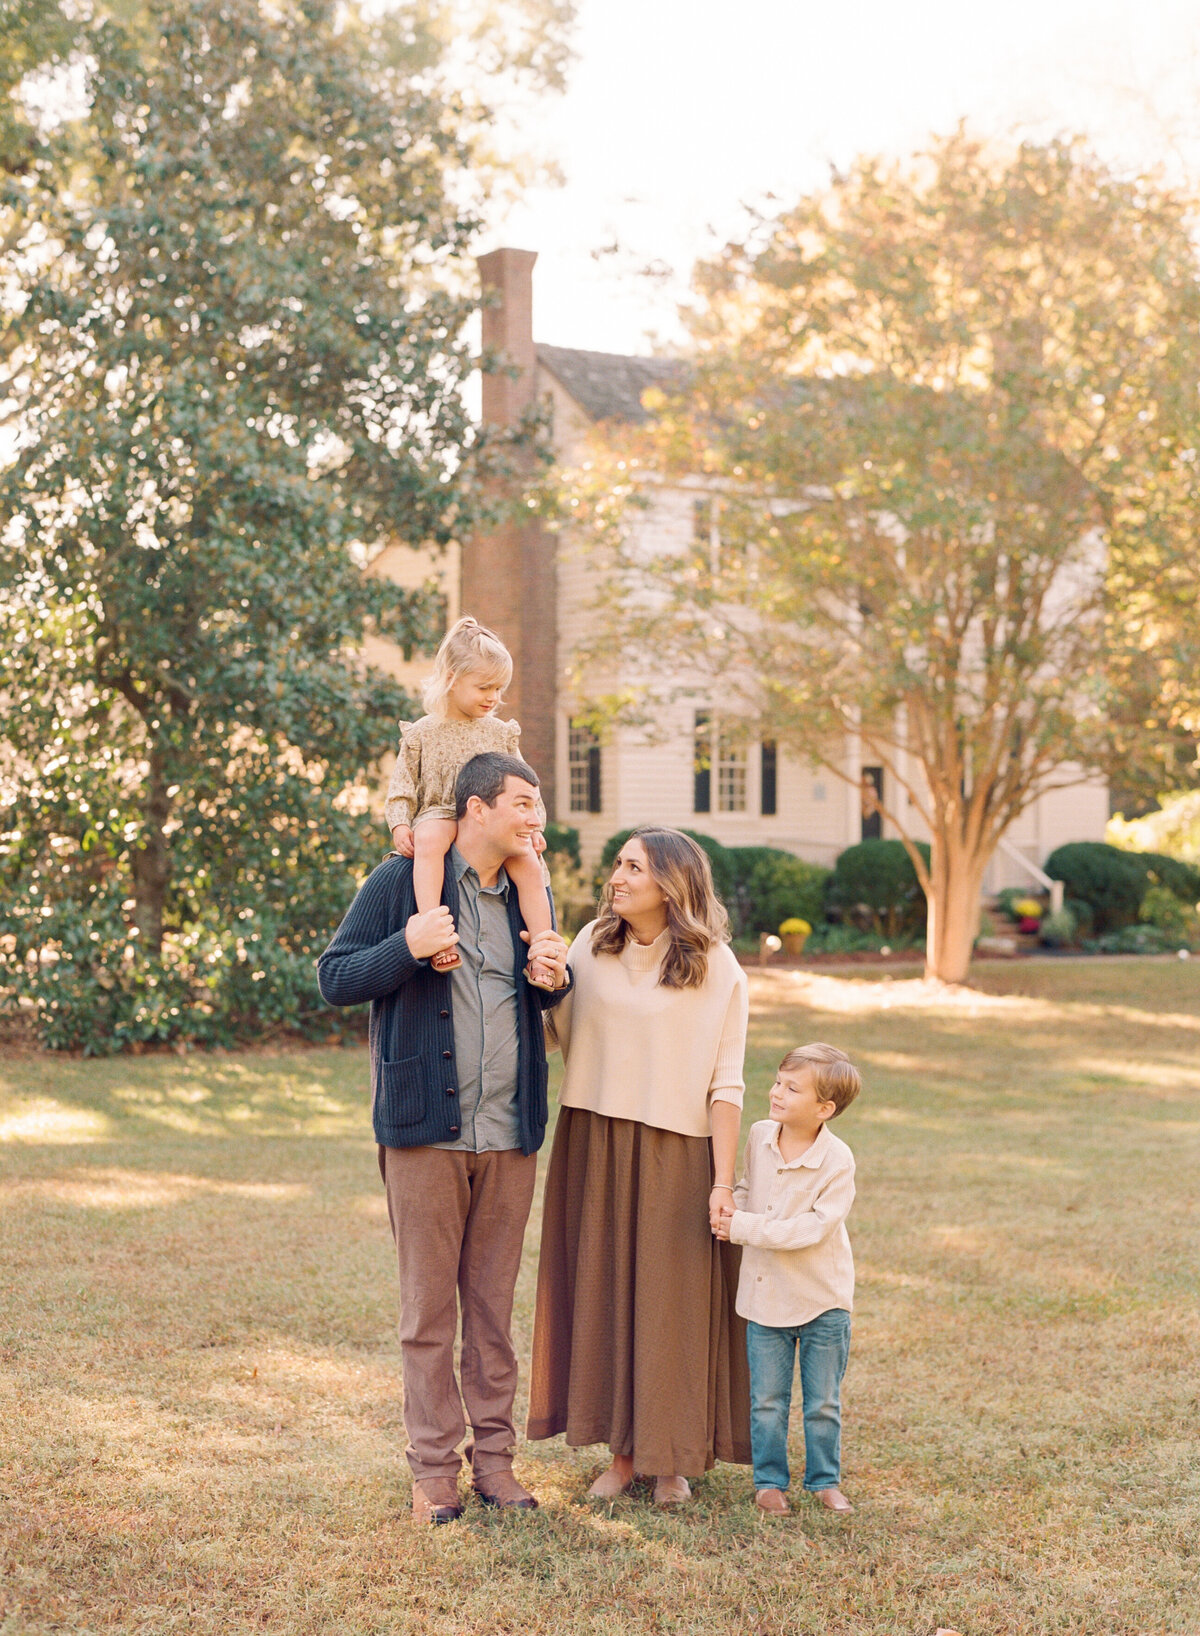 Family walks through a park in Wake Forest for family photos. Family walking during their family portrait session in Wake Forest, NC. Photographed by Raleigh family photographer A.J. Dunlap Photography.